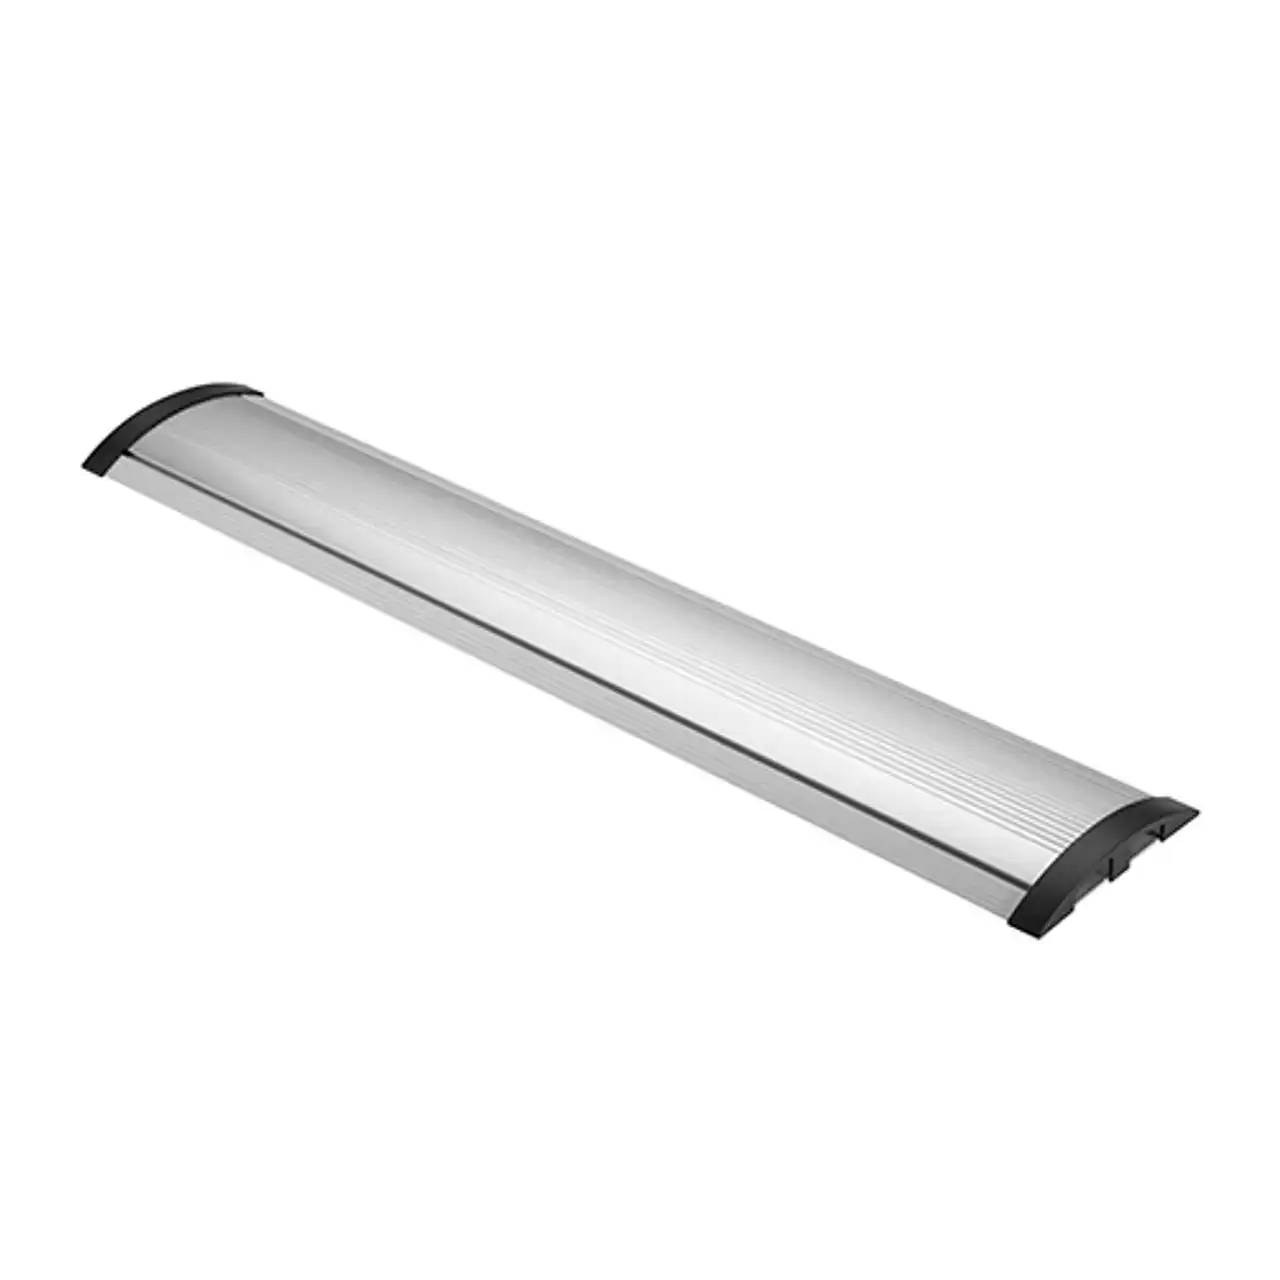 Brateck Aluminum Floor Cable Cover 754x139mm - Silver